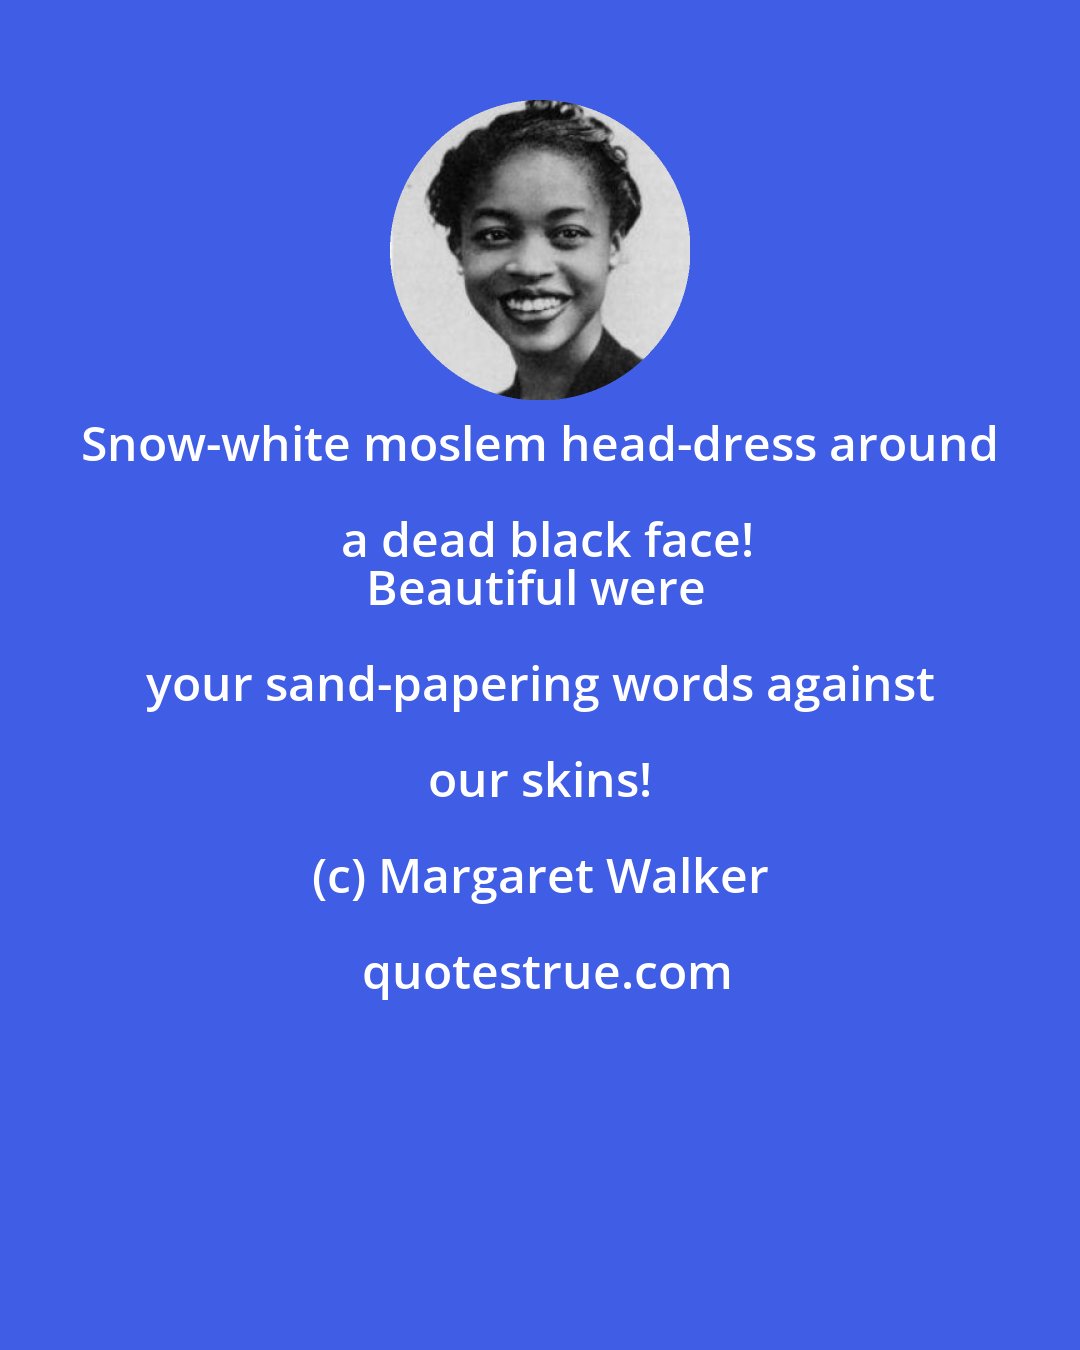 Margaret Walker: Snow-white moslem head-dress around a dead black face!
Beautiful were your sand-papering words against our skins!